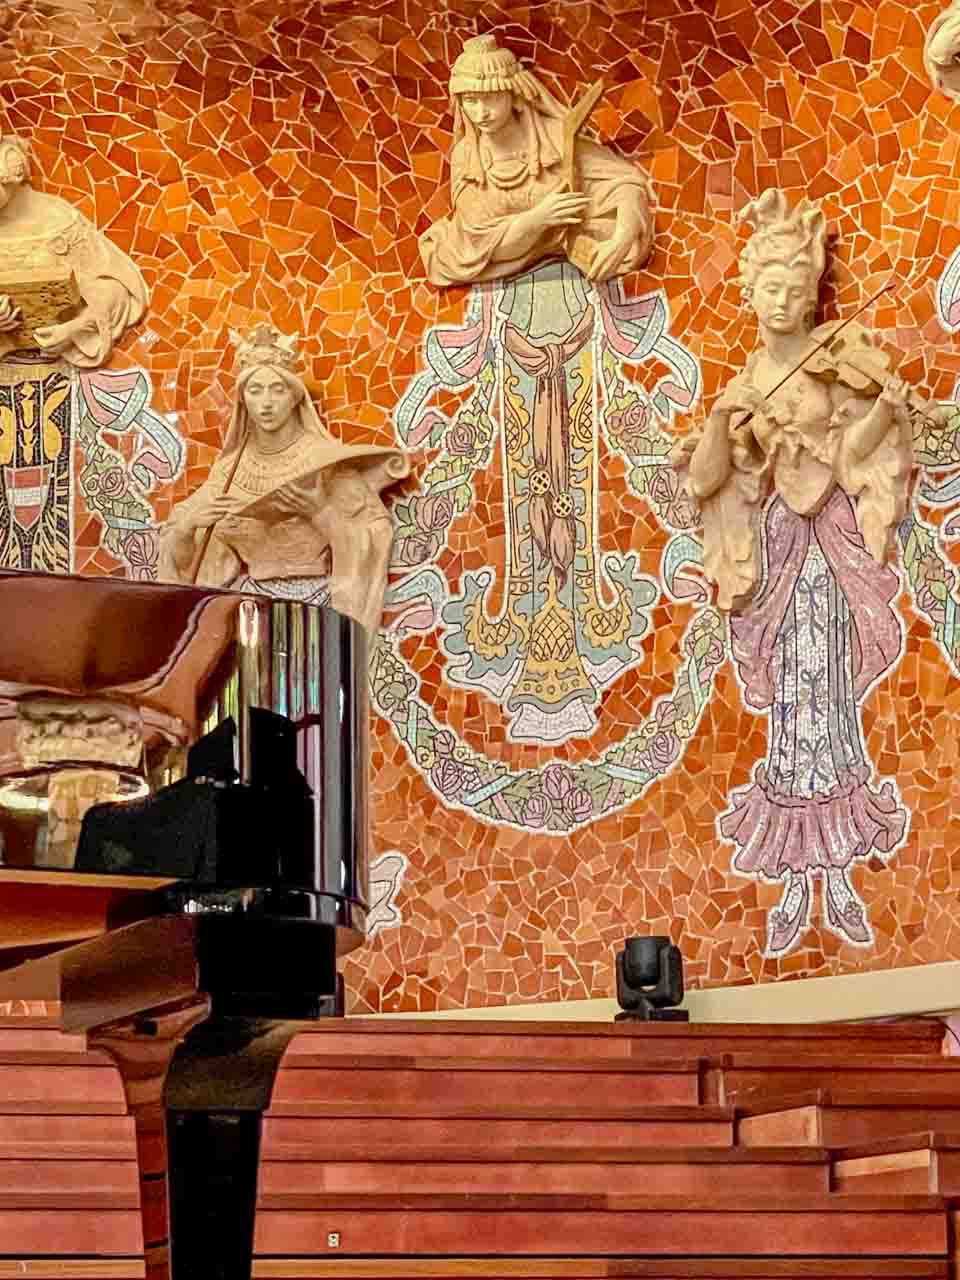 Sculpted ladies playing musical instruments are plastered on the wall behind a piano.